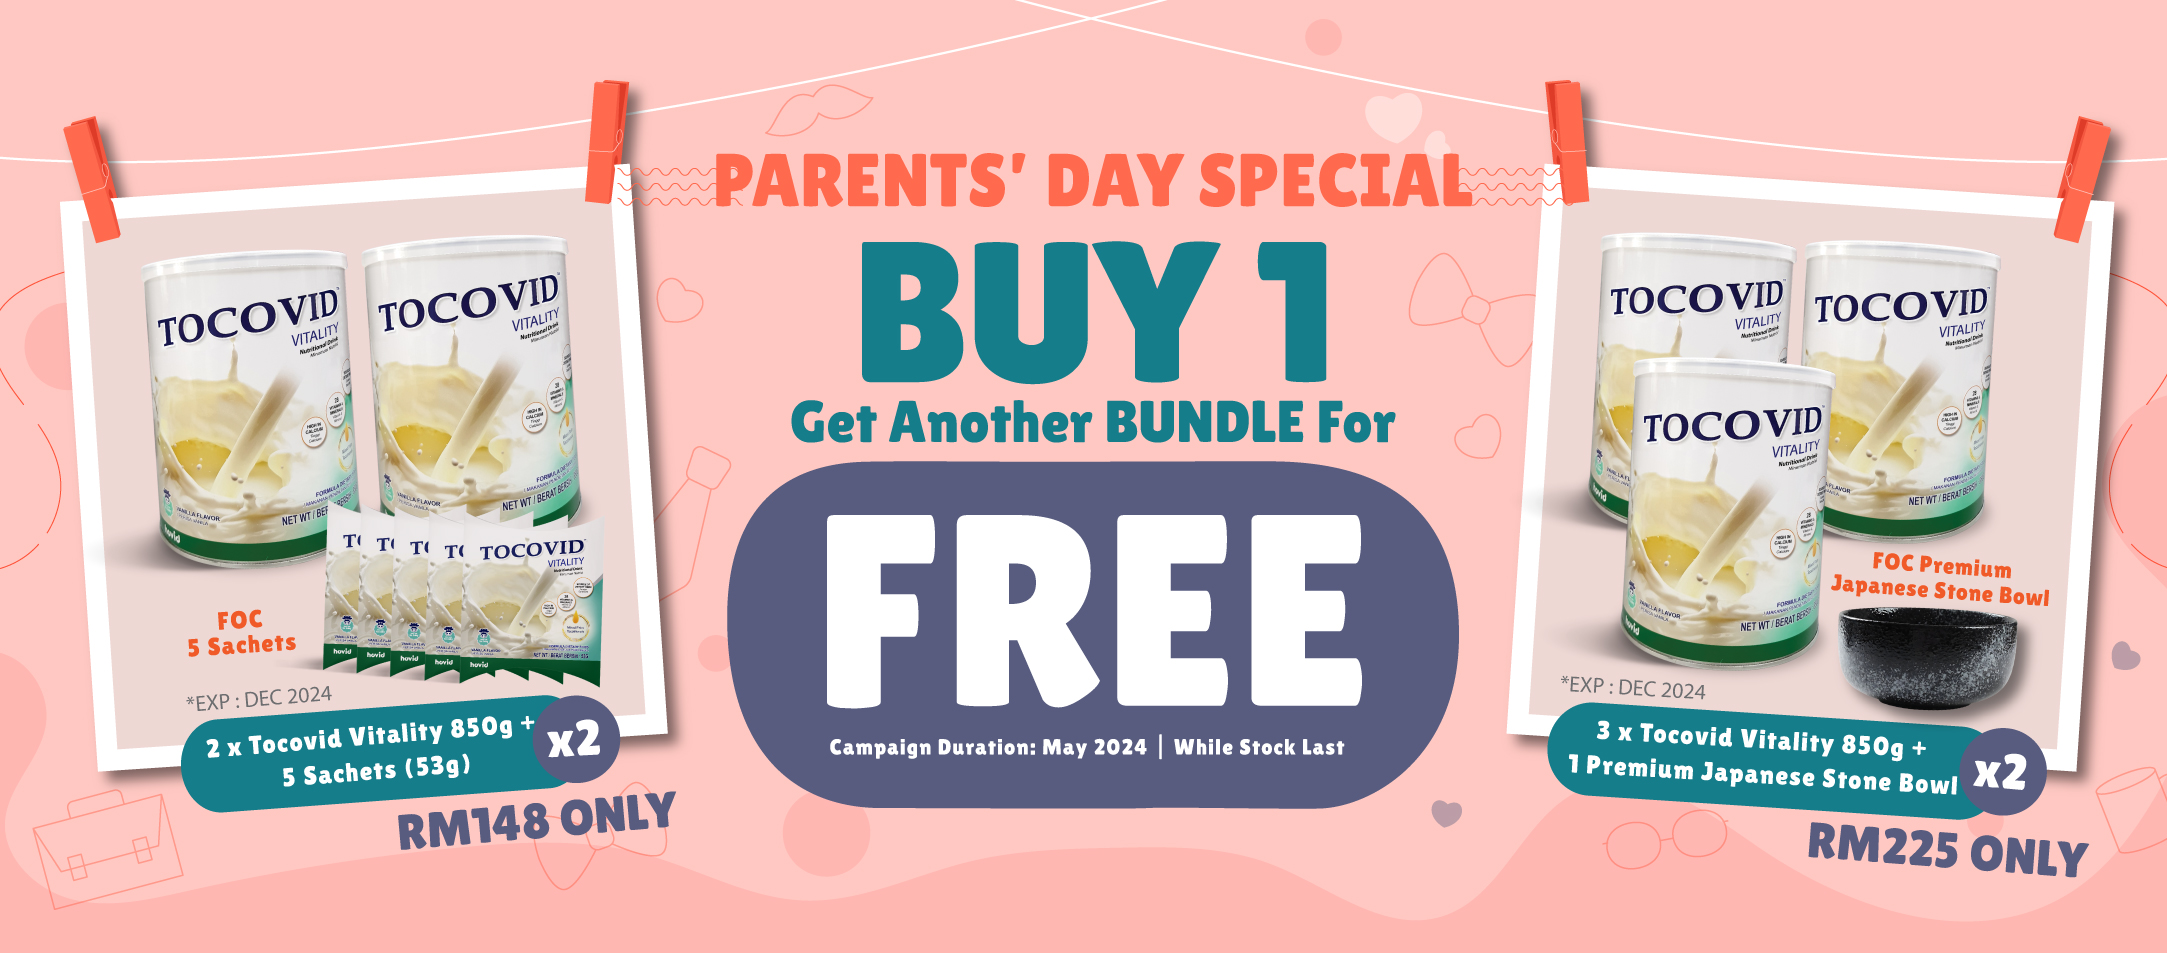 BUY 1 FREE 1 MOTHER DAY PROMO